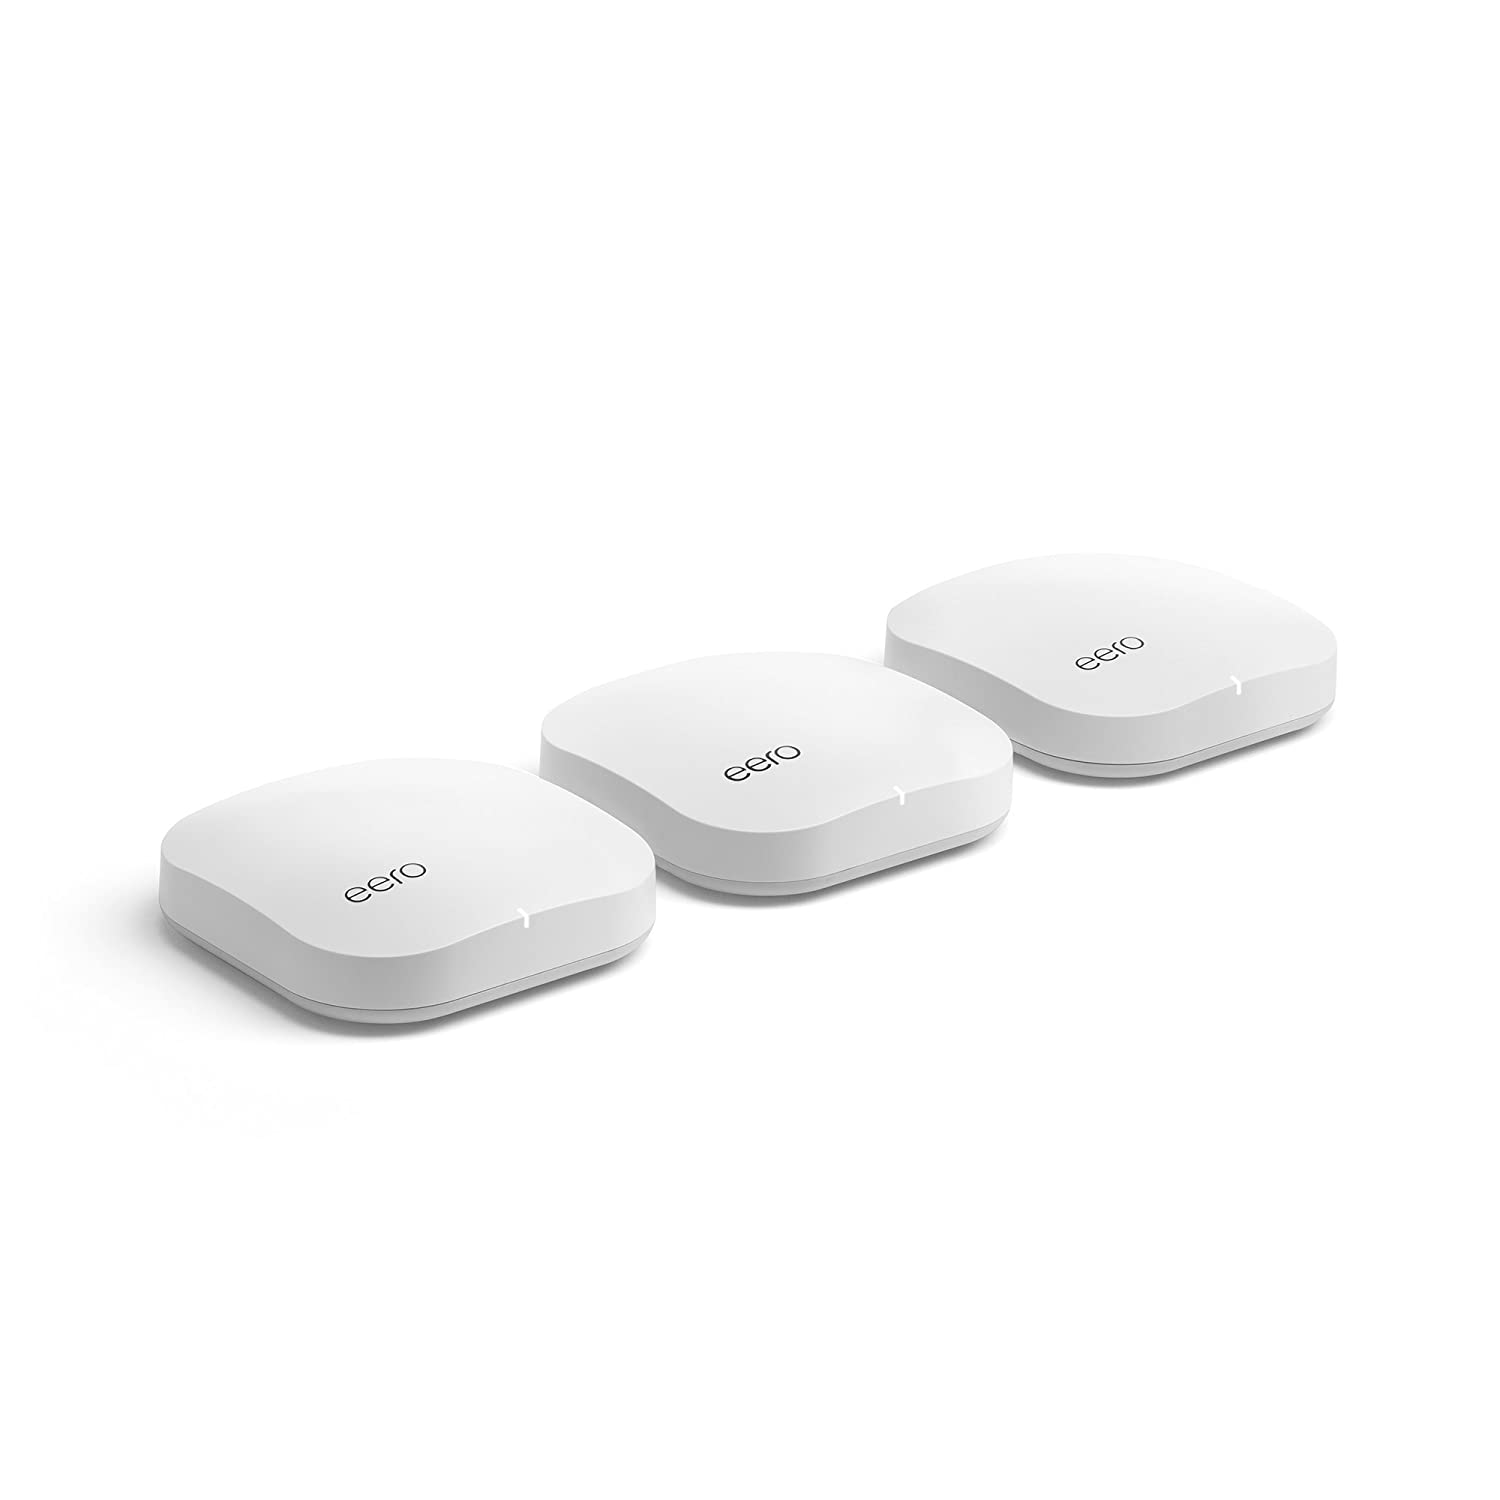 Amazon Prime Members: Amazon eero Mesh WiFi 5 Router: 3-Pack Pro $224, 3-Pack $143 & More + 8% SD Cashback + Free Shipping